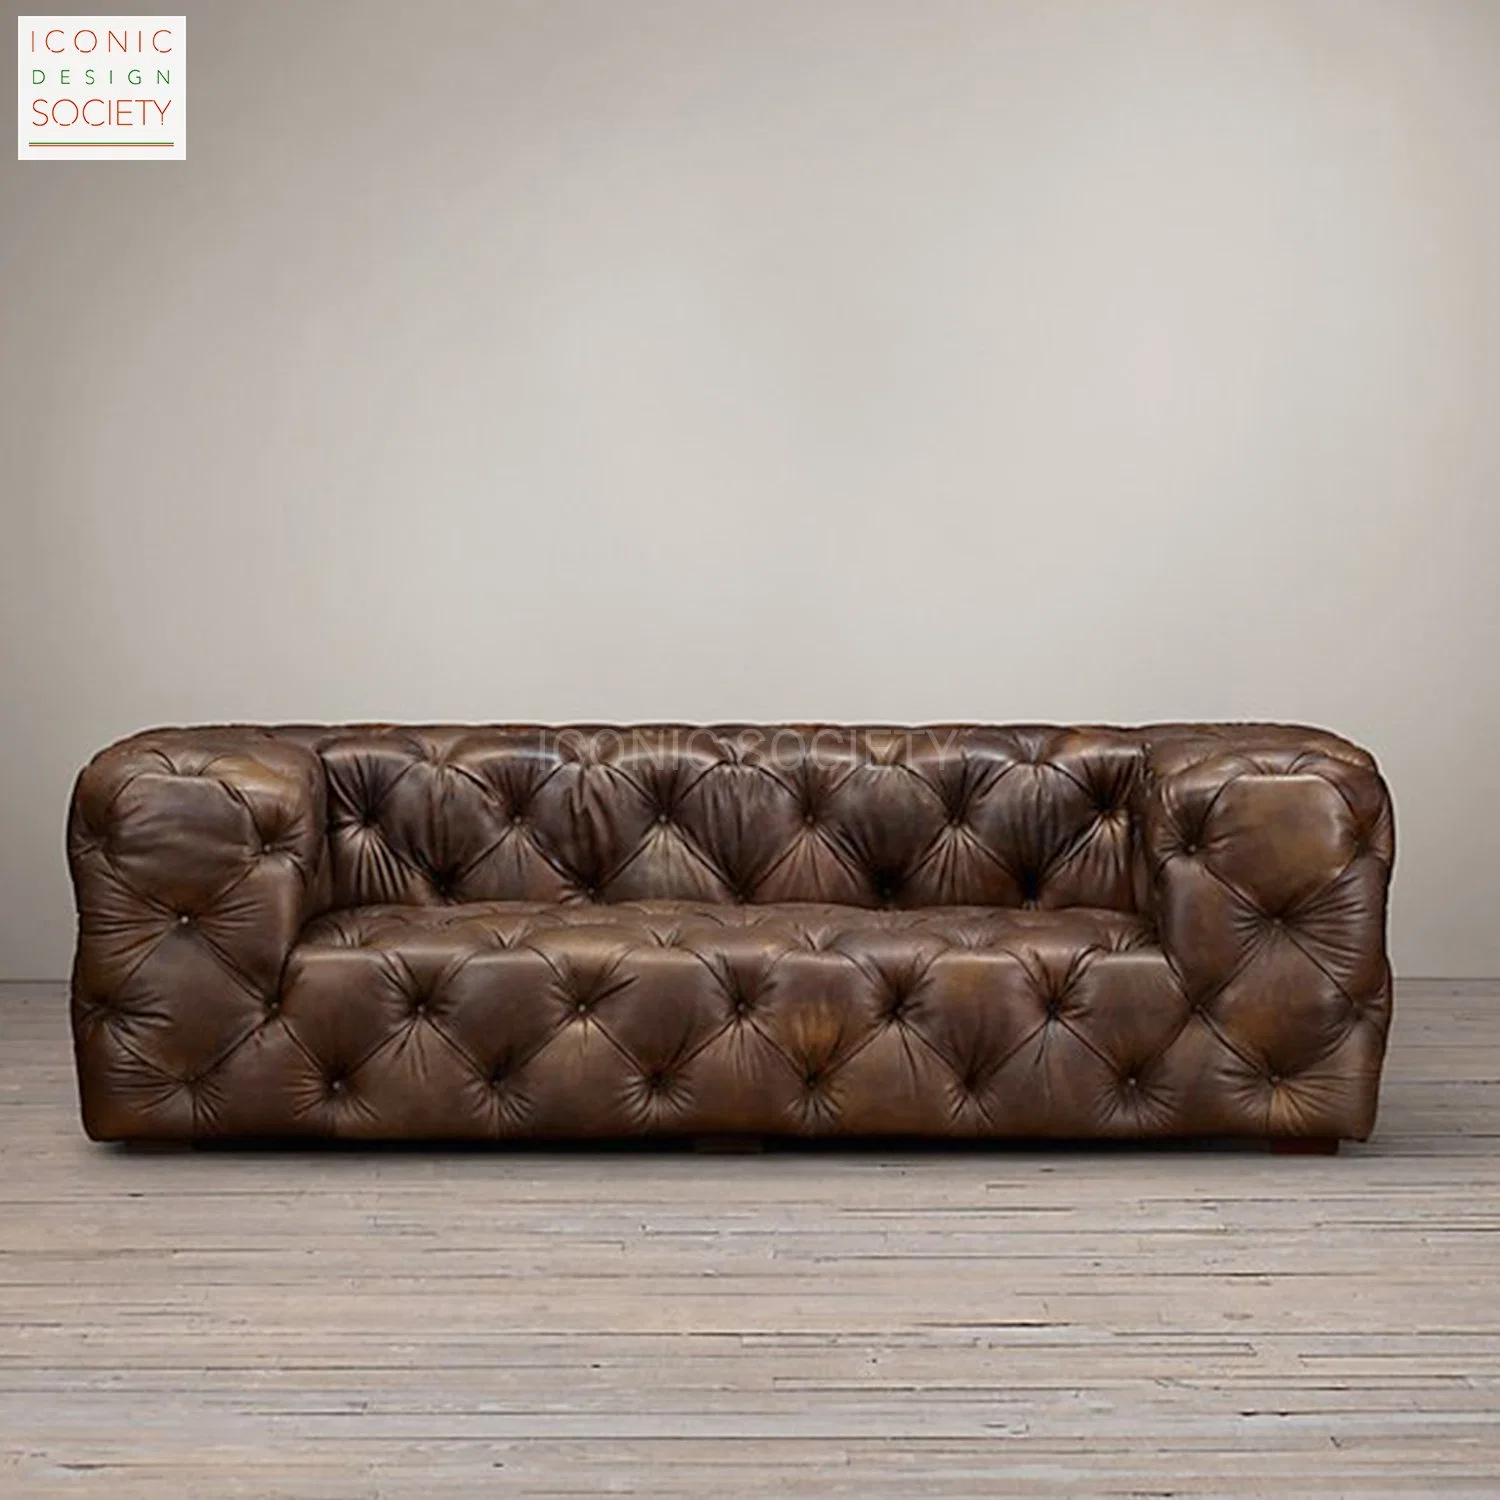 Modern Luxury Living Room Furniture Hotel Classic Button Tufted Genuine Leather Chesterfield Sofa